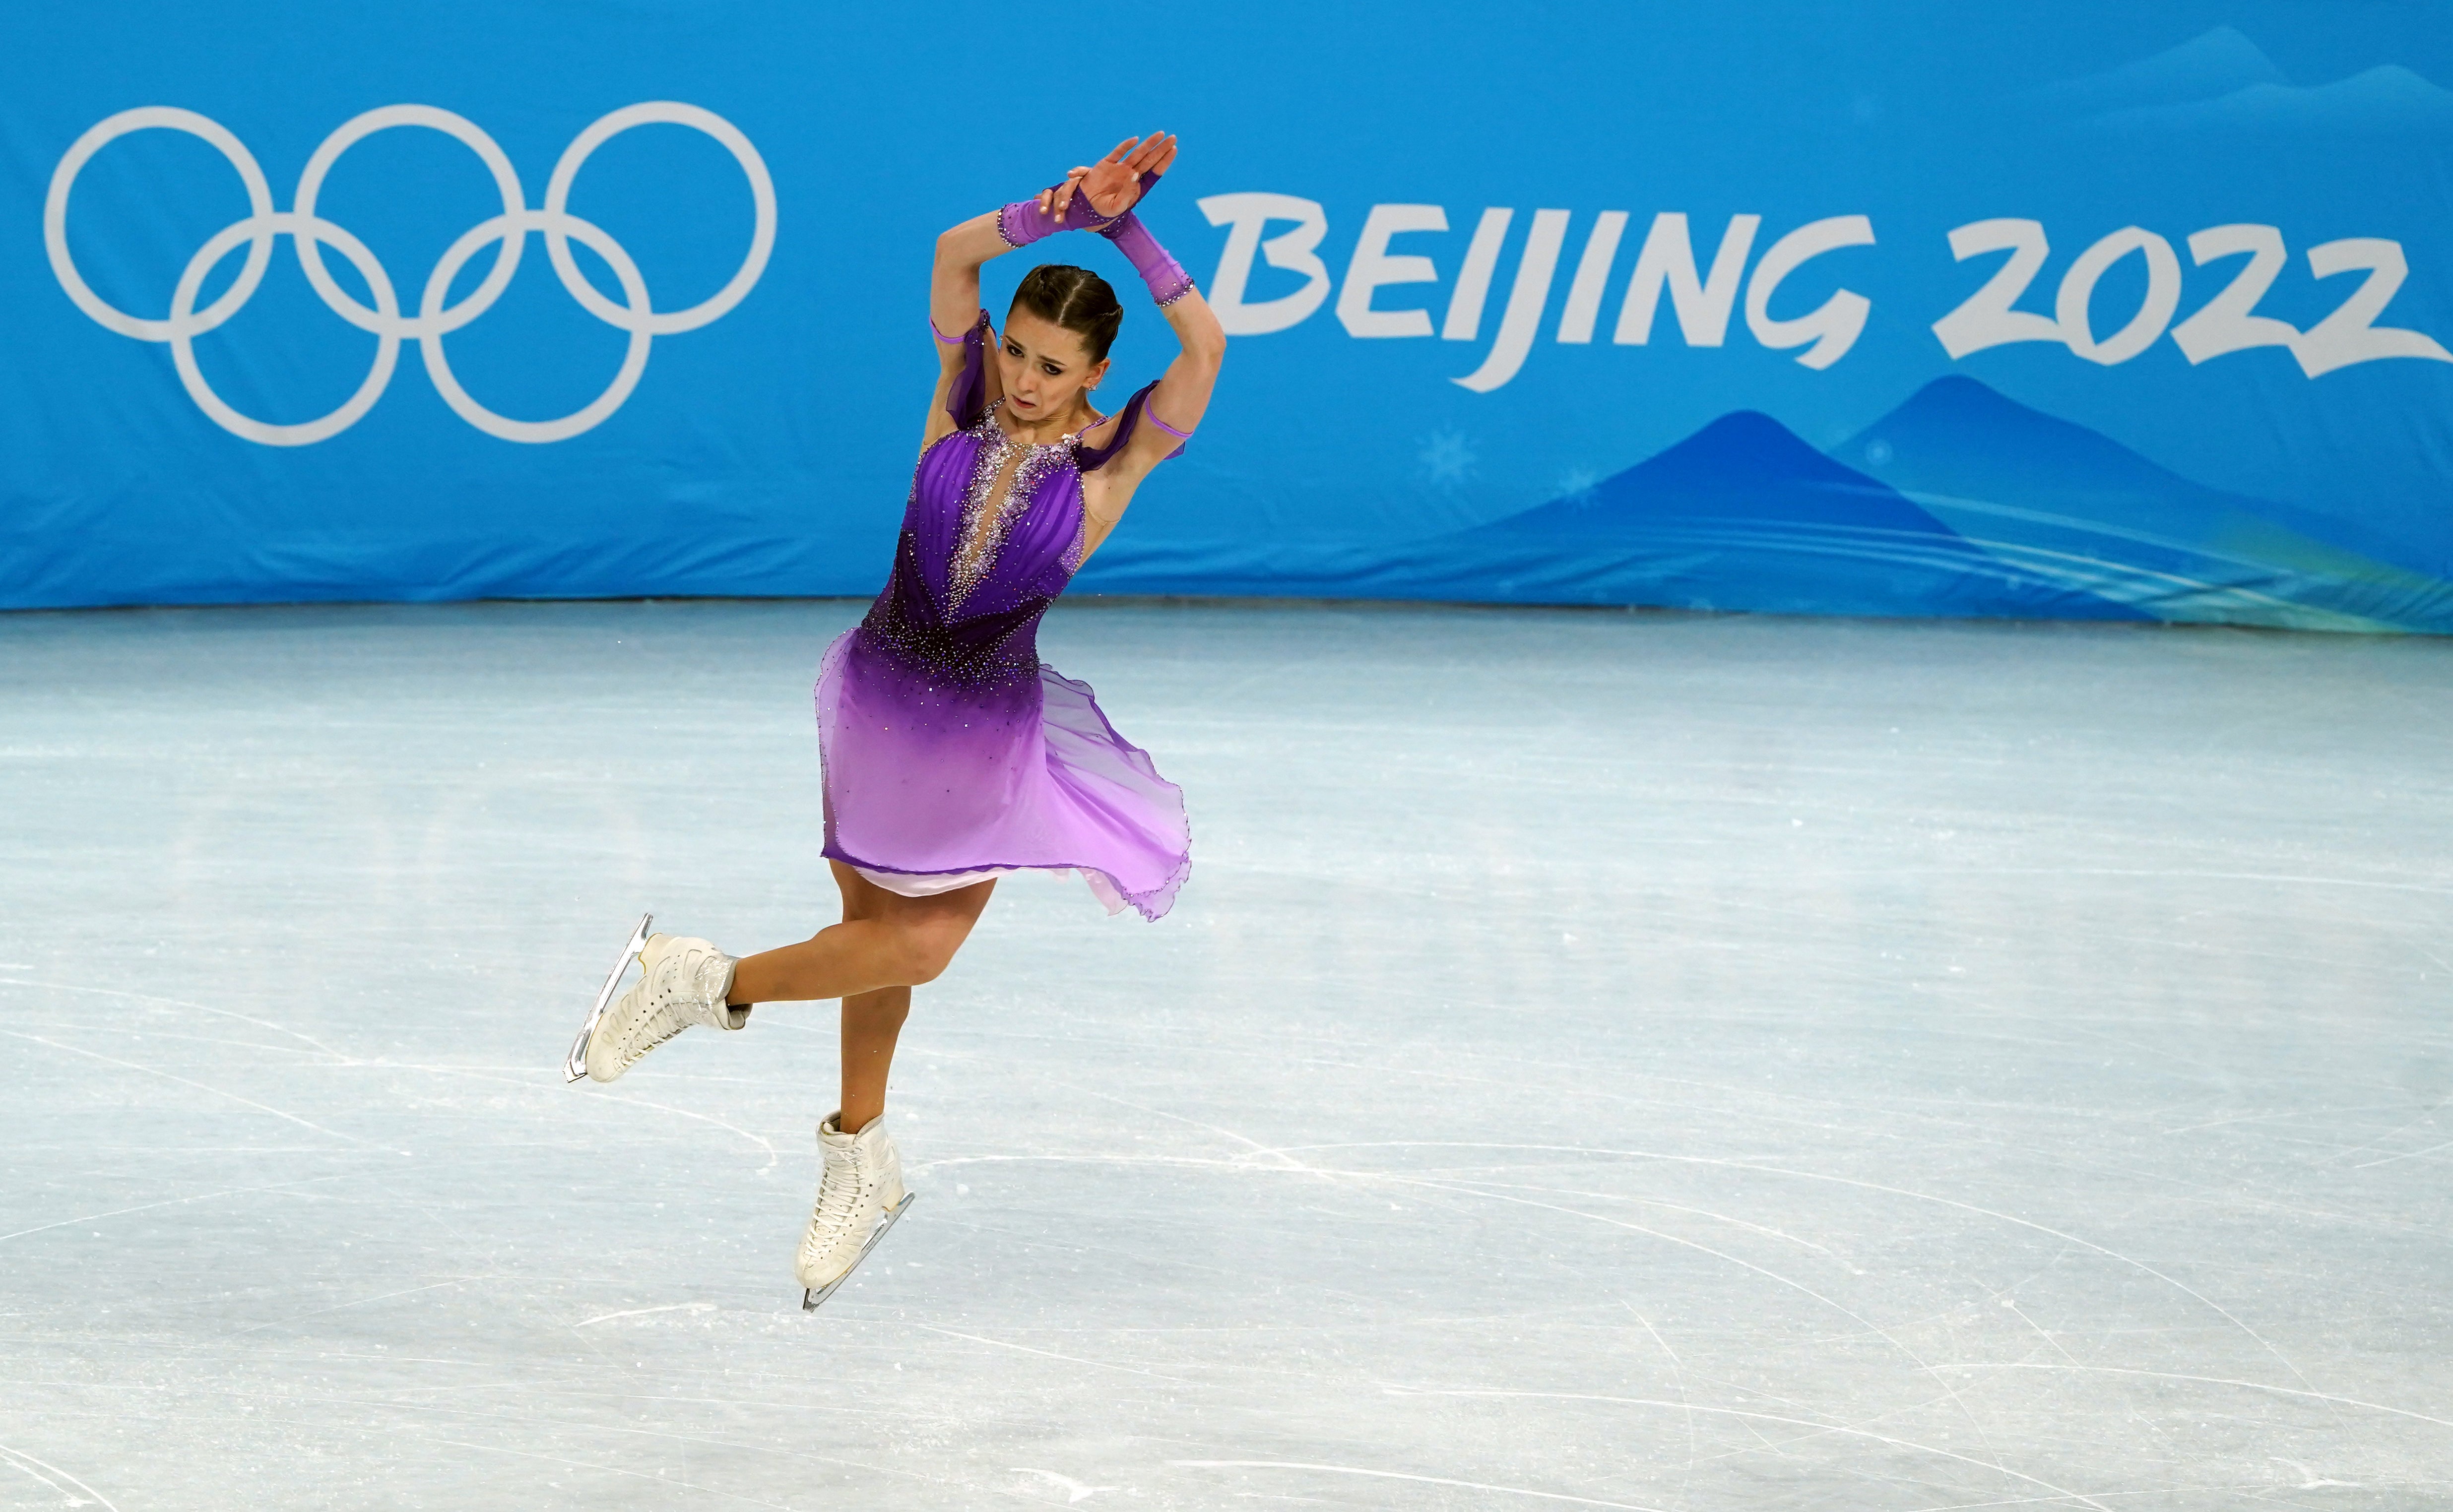 Kamila Valieva faces being thrown out of the Winter Olympics